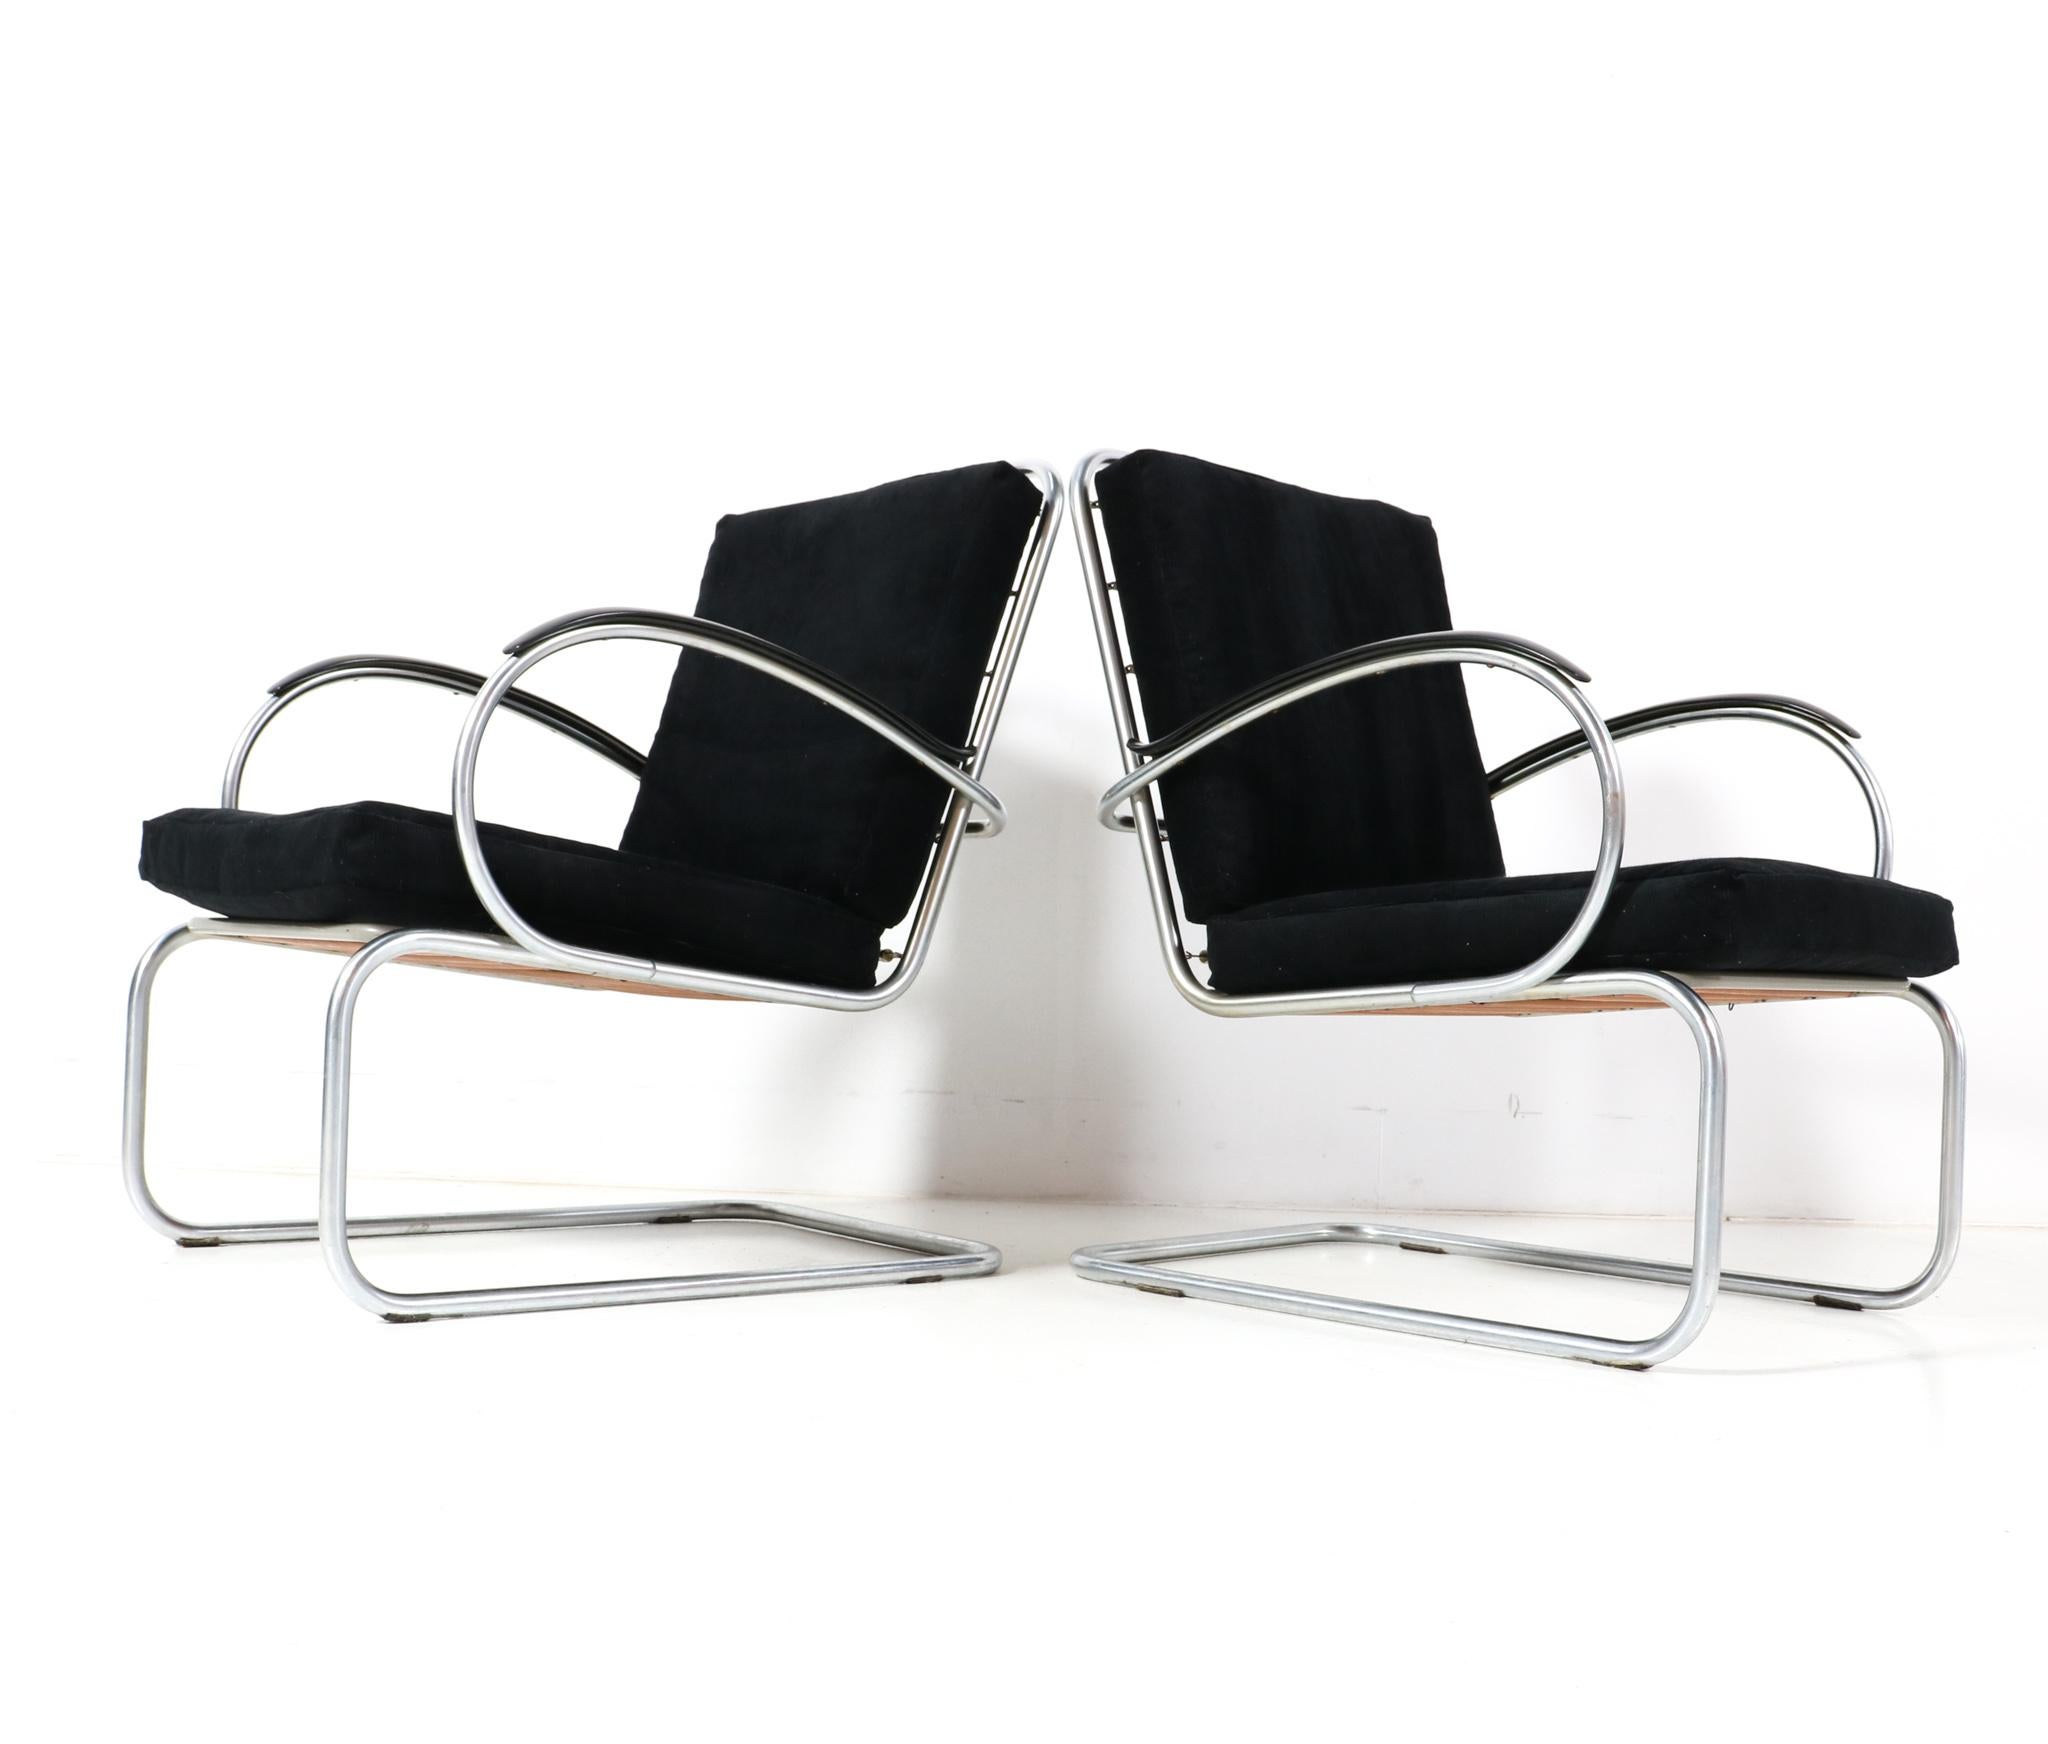 Two Art Deco Bauhaus Model 409 Lounge Chairs by W.H. Gispen for Gispen, 1930s In Good Condition For Sale In Amsterdam, NL